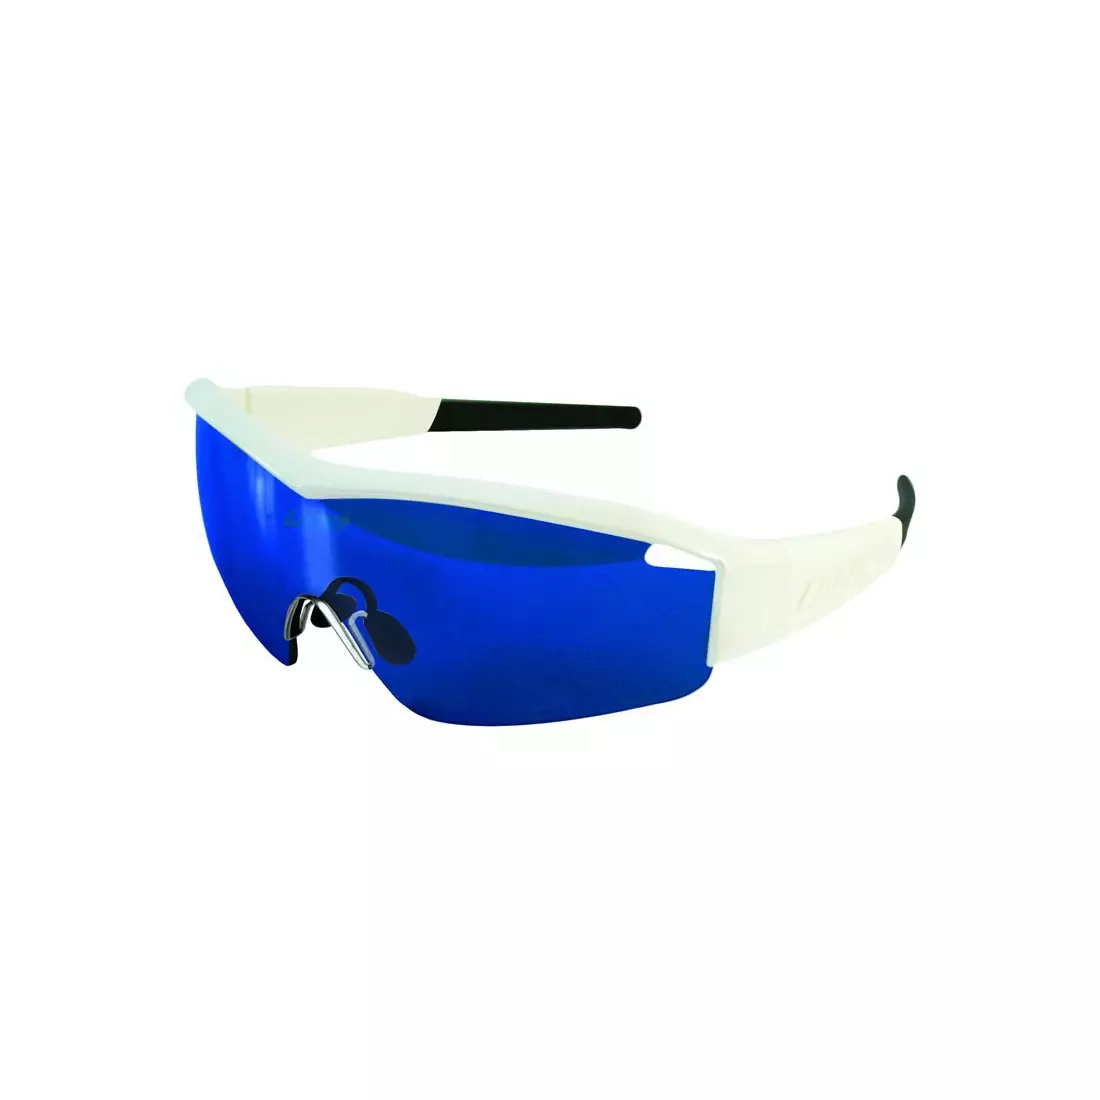 LZR-OKL-SOLD-GLWH Glasses LAZER SS17 SOLID STATE1 Gloss White (Smoke-Blue REVO. Yellow-Blue Mirror. Clear)